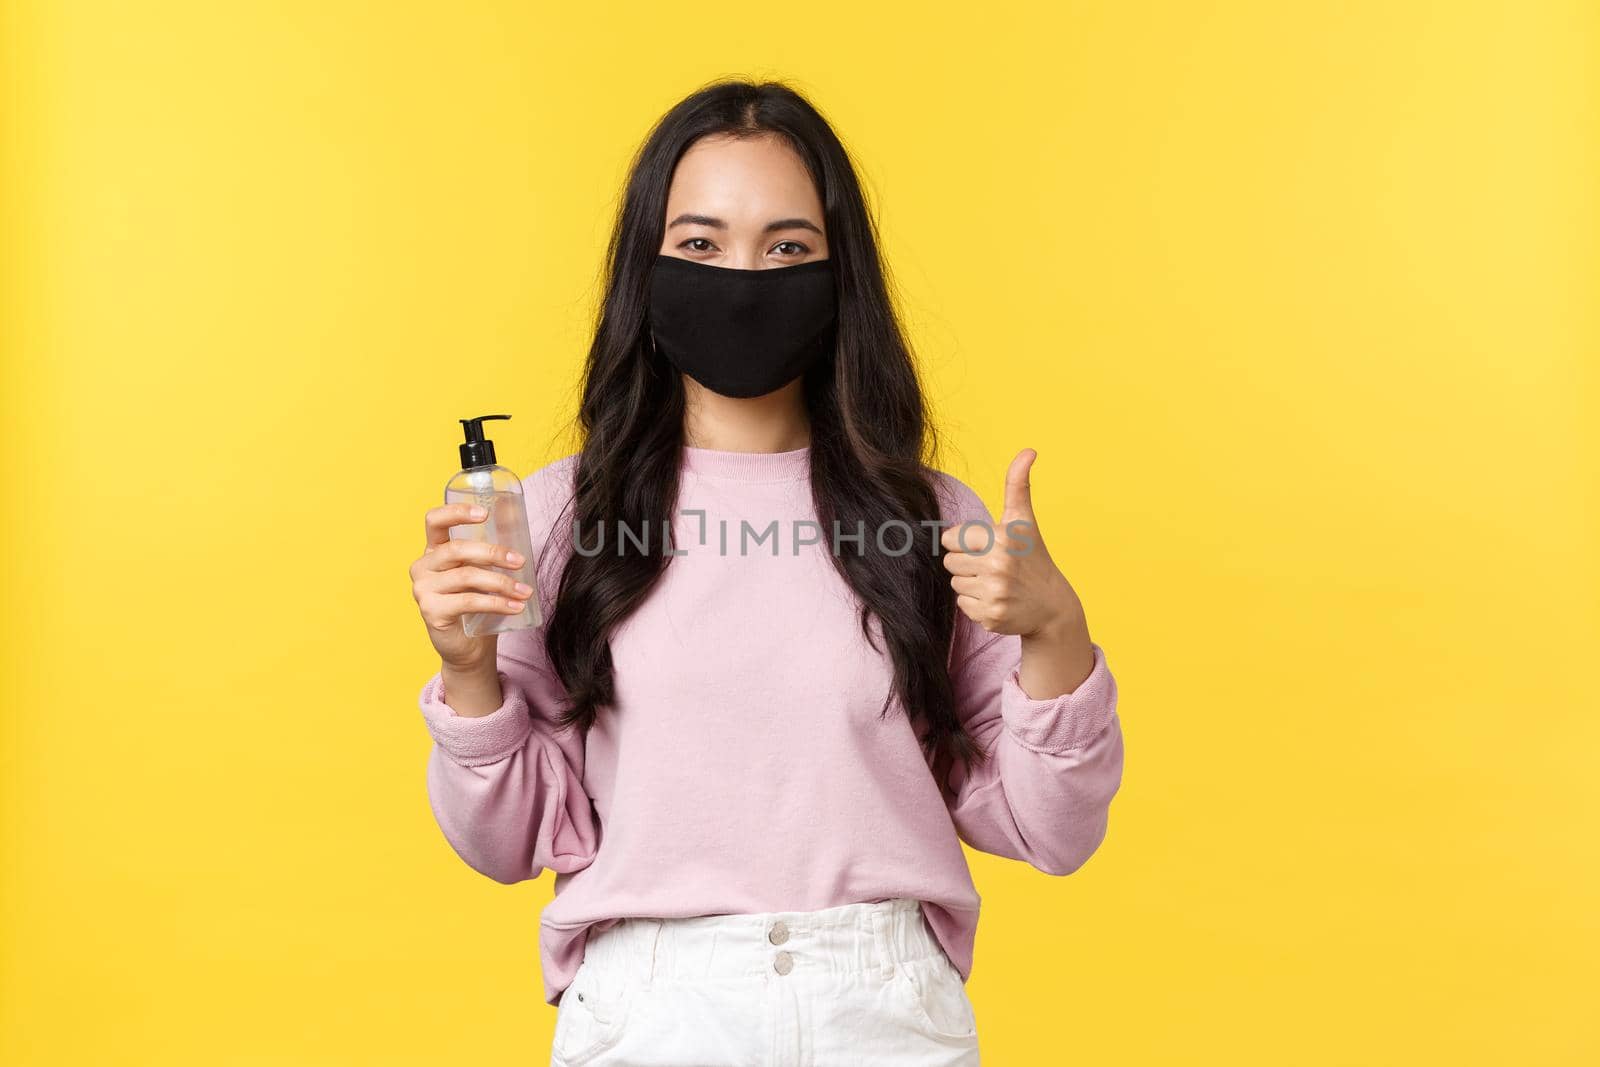 Covid-19, social-distancing lifestyle, prevent virus spread concept. Pretty smiling asian girl in face mask, showing good hand sanitizer and thumbs-up, approve hygiene measures during coronavirus.